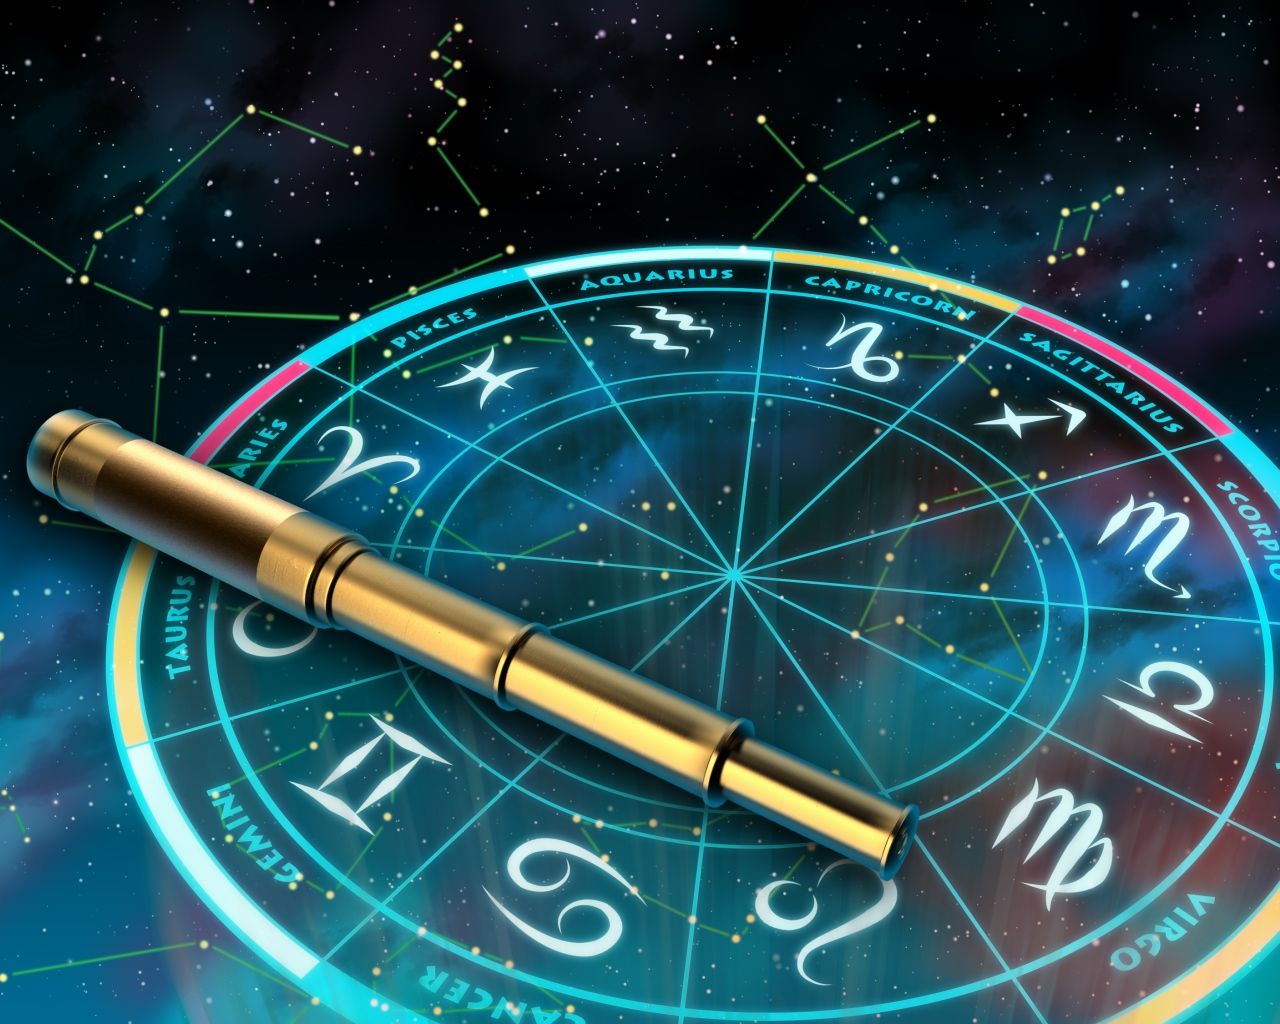 AstroSculpt Institute: Shaping Your Destiny through Astrological Mastery